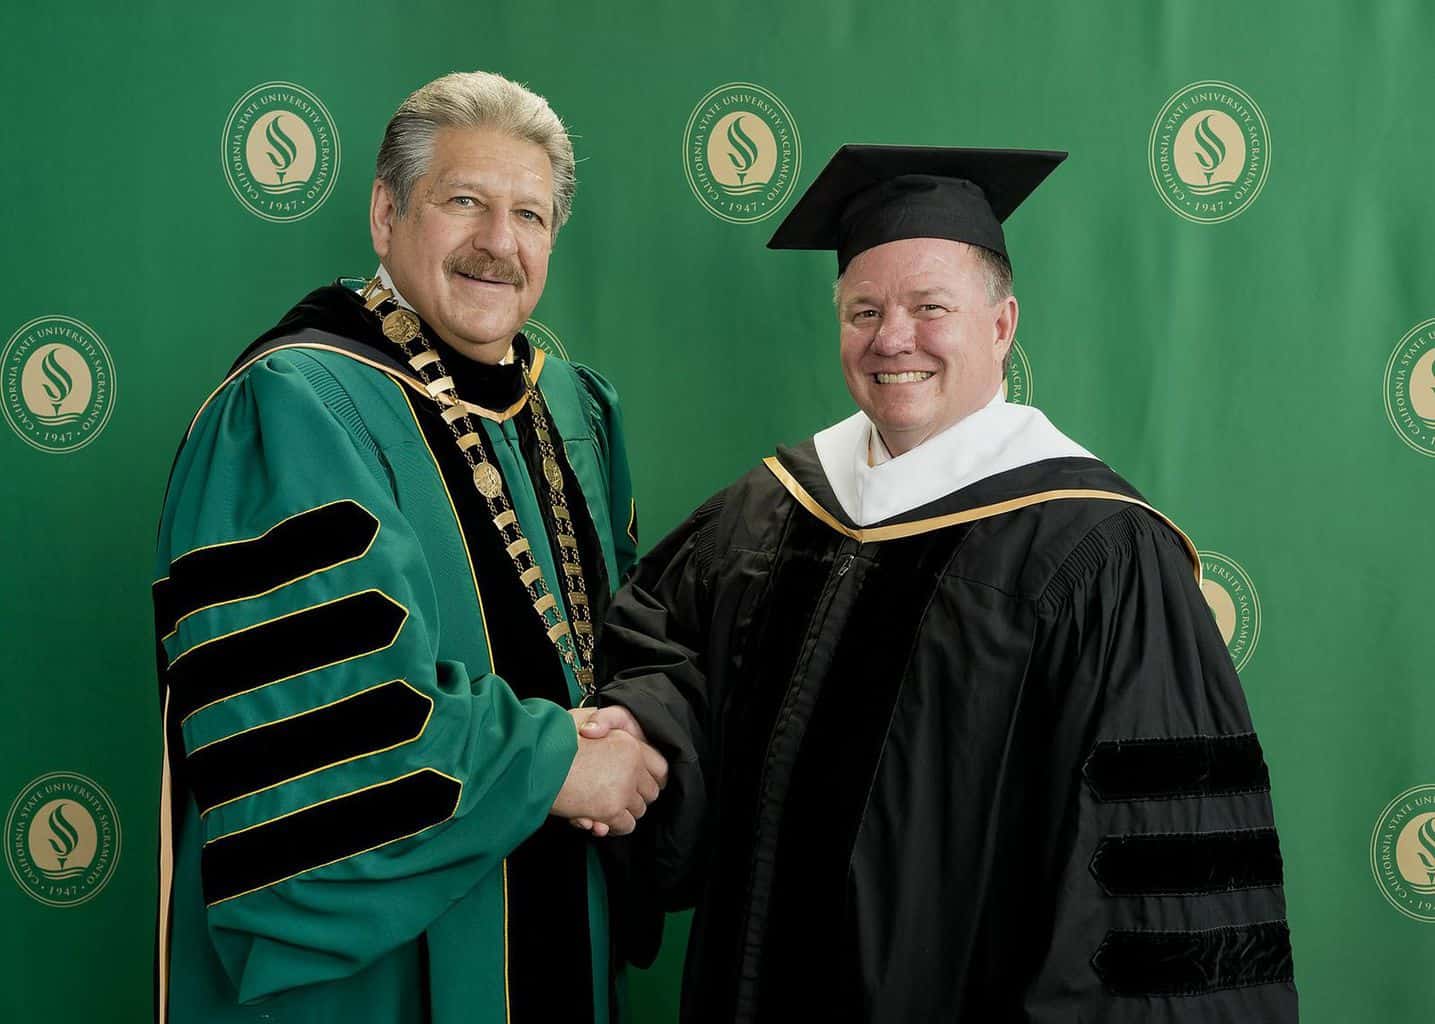 Dale Carlsen receives honorary doctorate from alma mater Sacramento State University